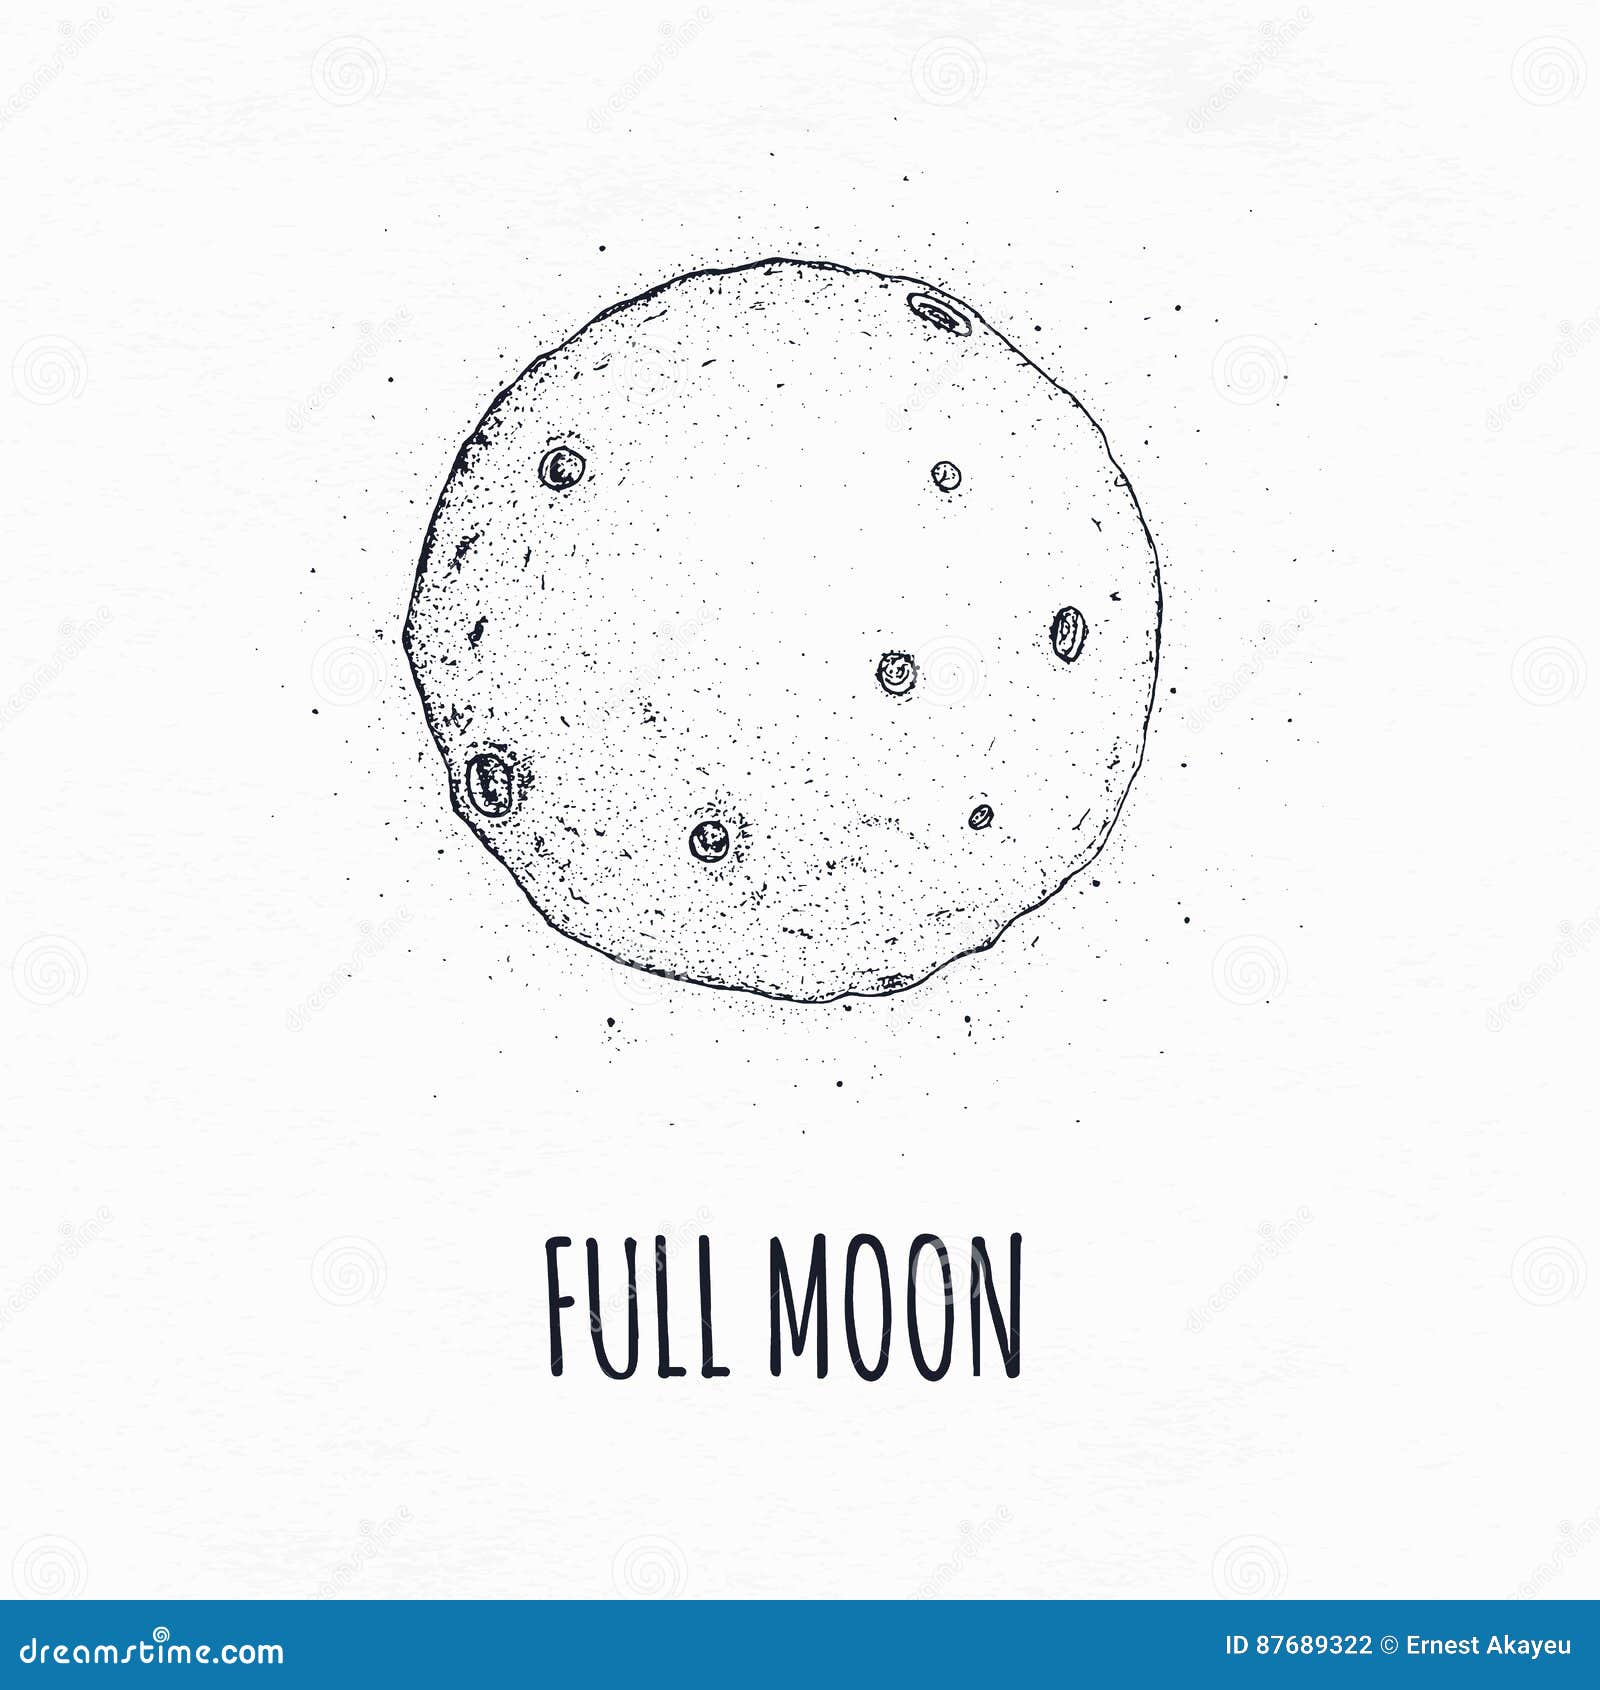 Full moon day drawing ll what does the moon look like on this day draw it  ll night sky drawing ll - YouTube